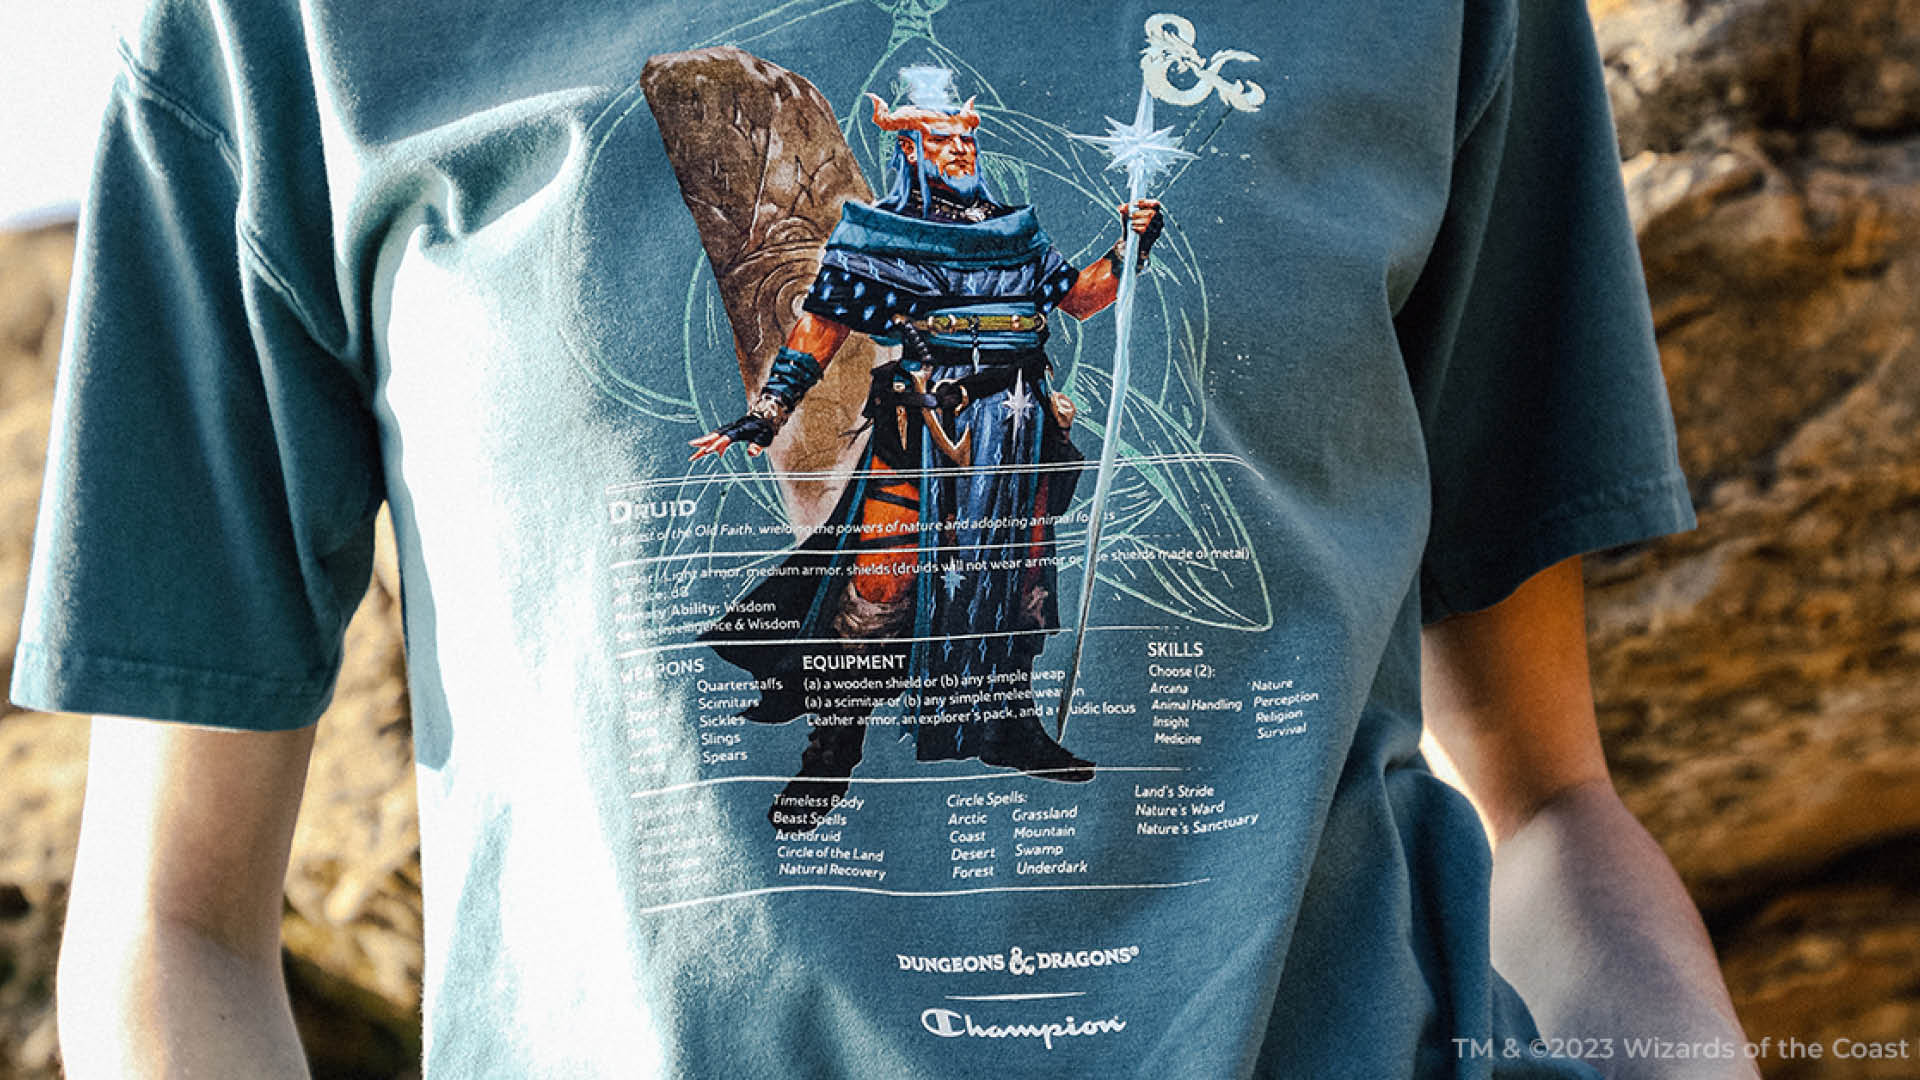 Dungeons & Dragons x Champion Capsule Collection Launched